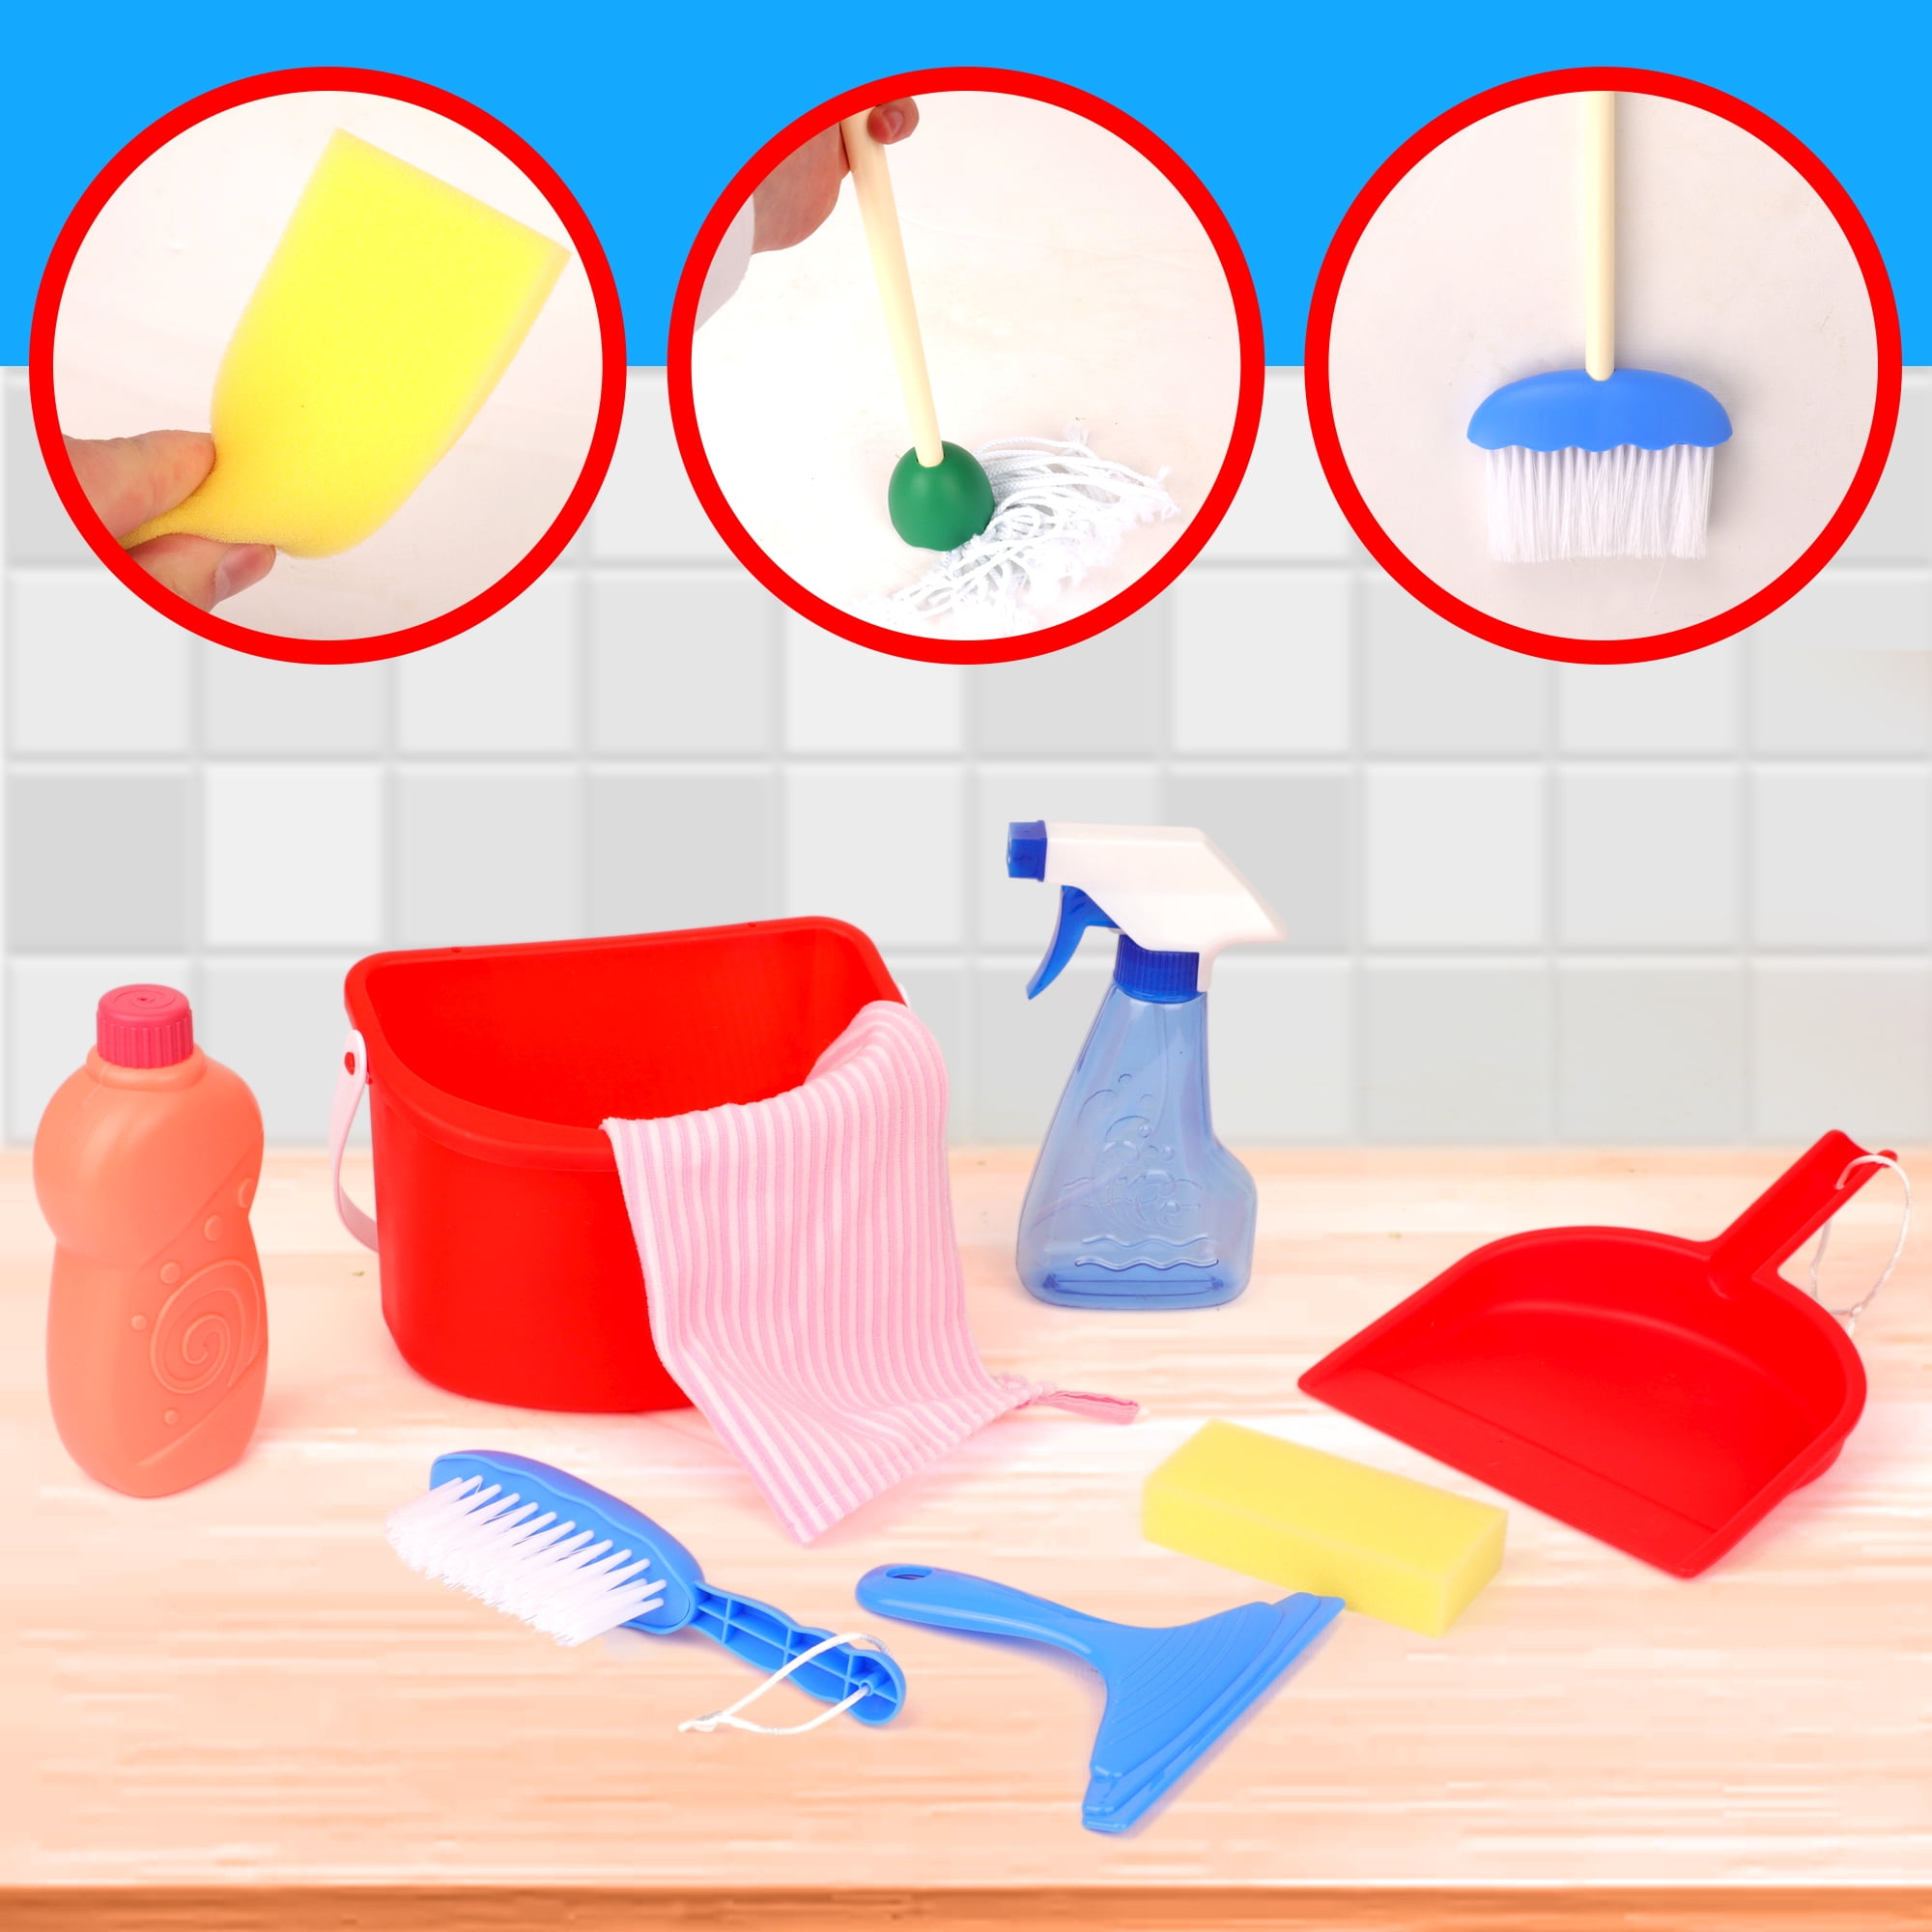 Playkidz Deluxe Cleaning Set, 11Pcs Includes Spray, Mop, Brush, Broom,  Sponge, Squeegee - Play Helper Realistic Housekeeping Set, Recommended for  Ages 3+ 